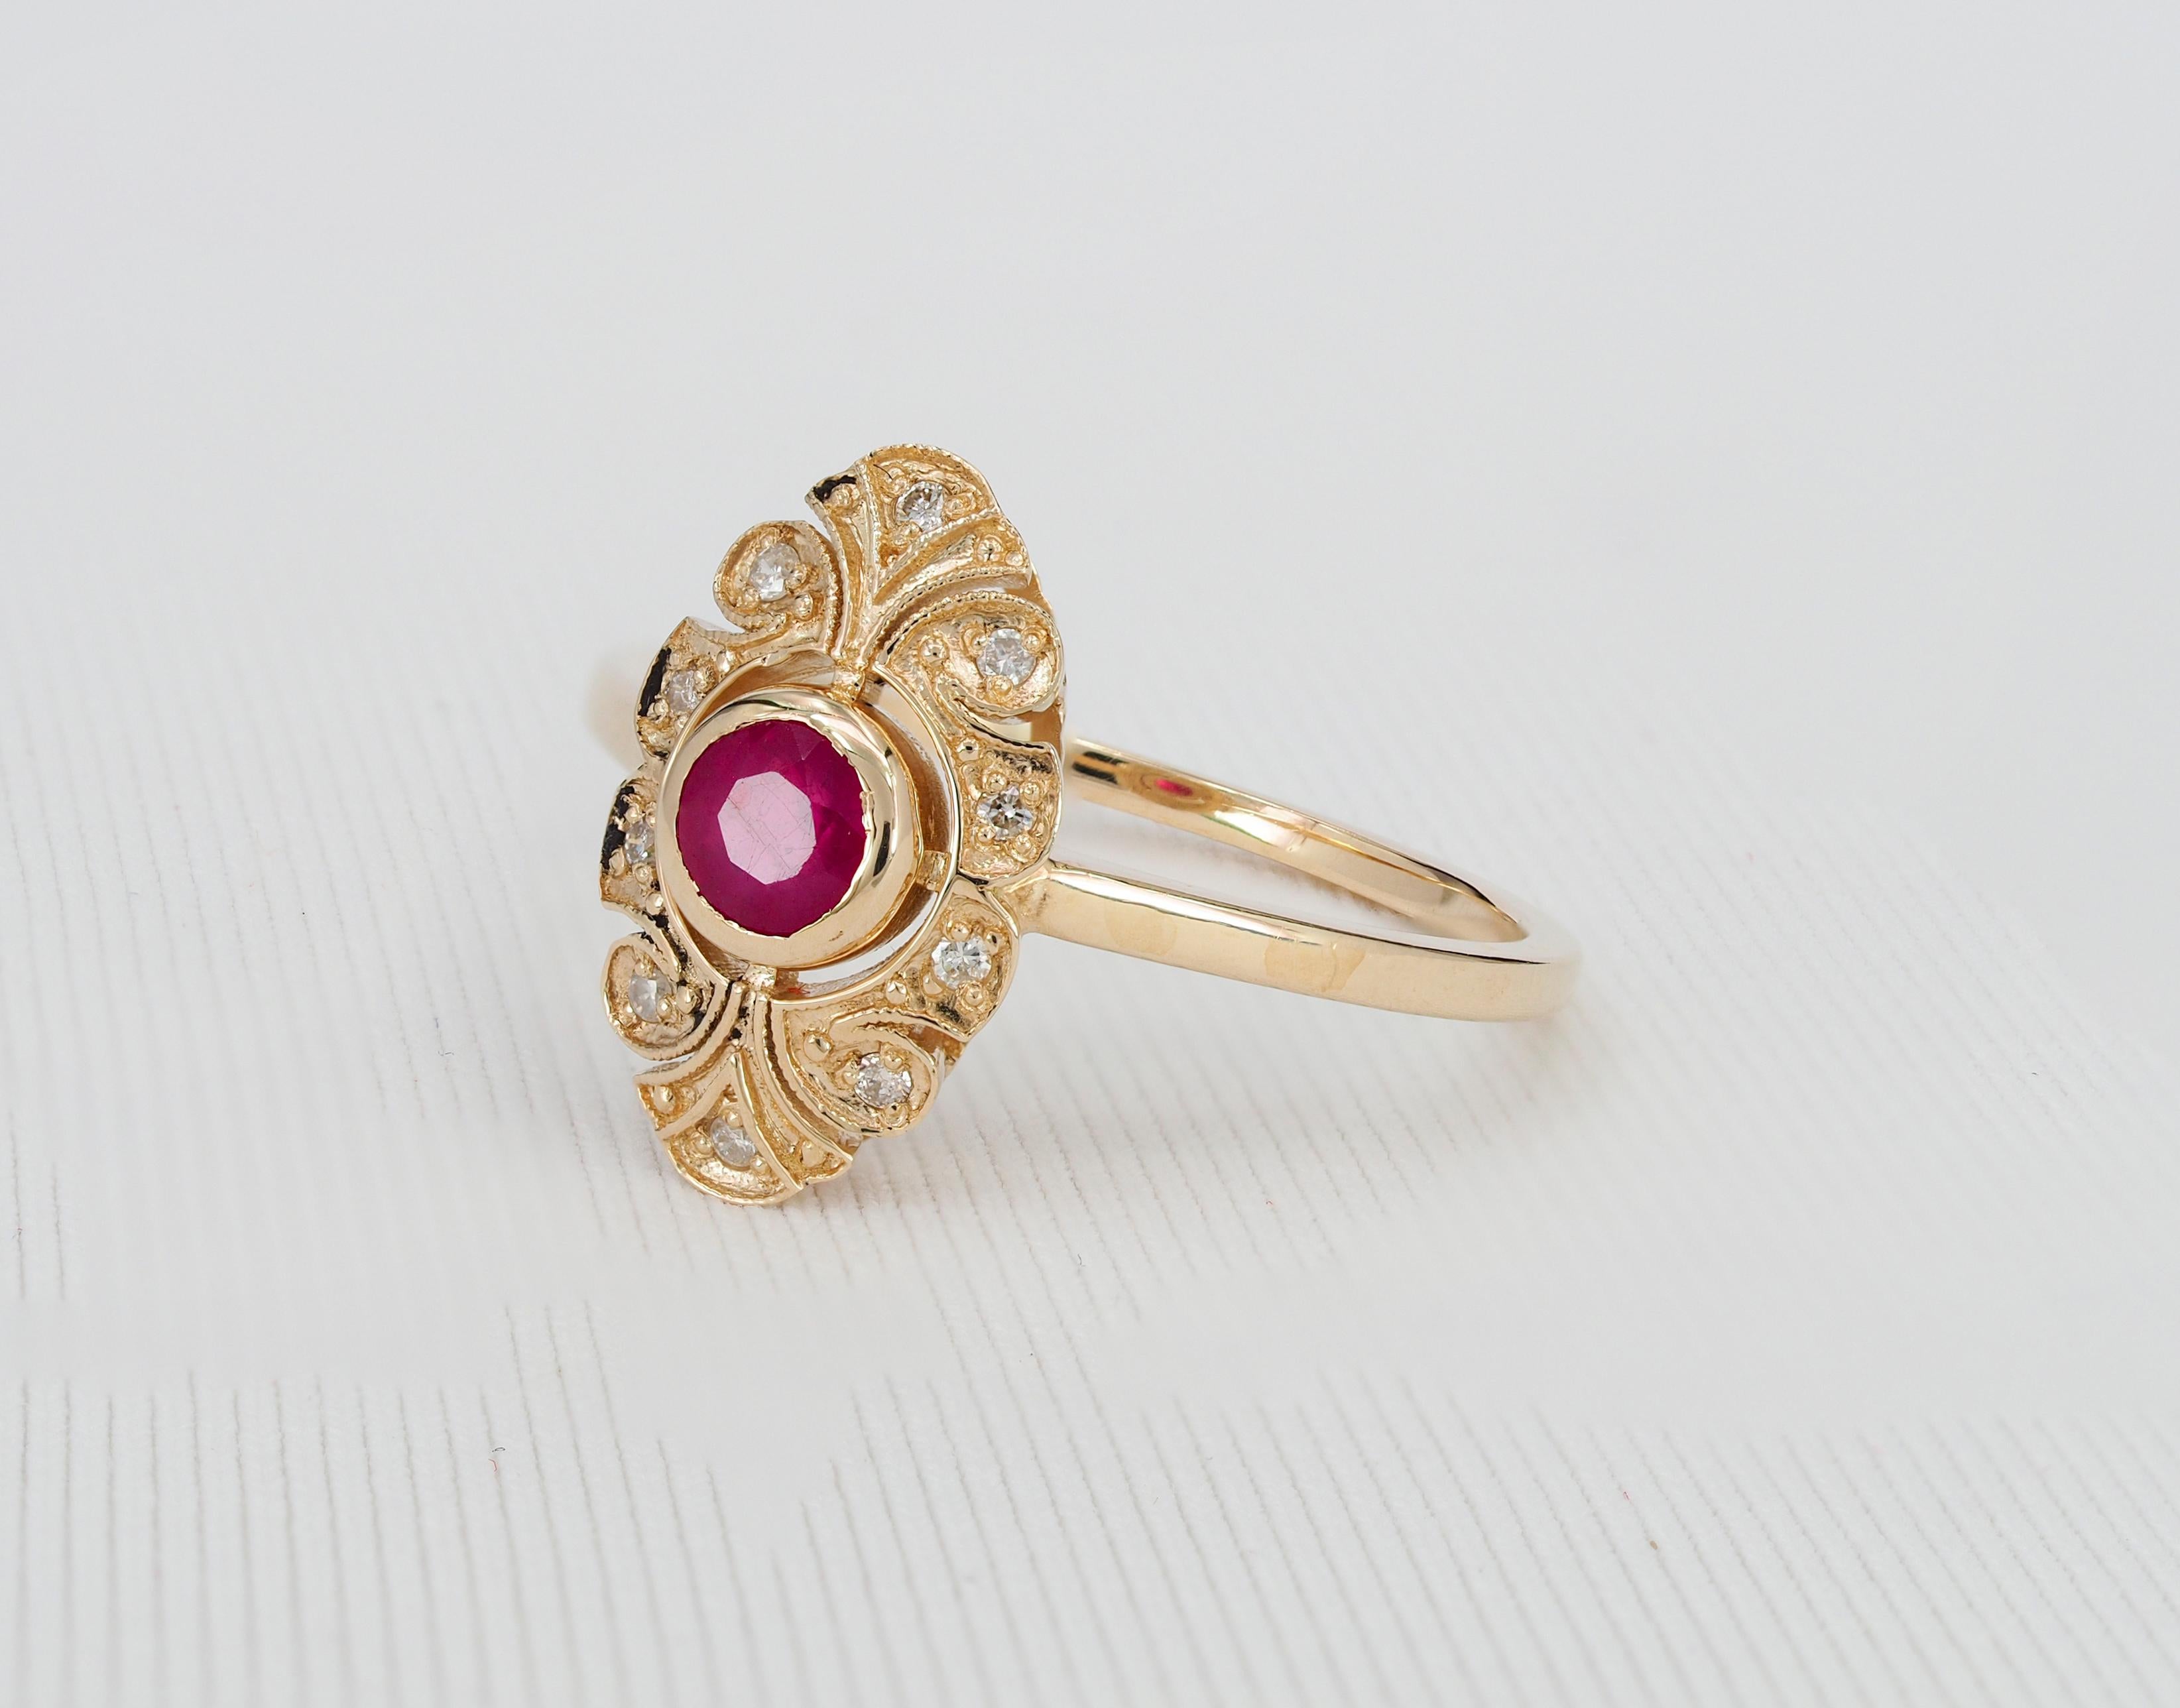 For Sale:  14 karat Gold Ring with Ruby and Diamonds, Vintage Inspired Ring.  5